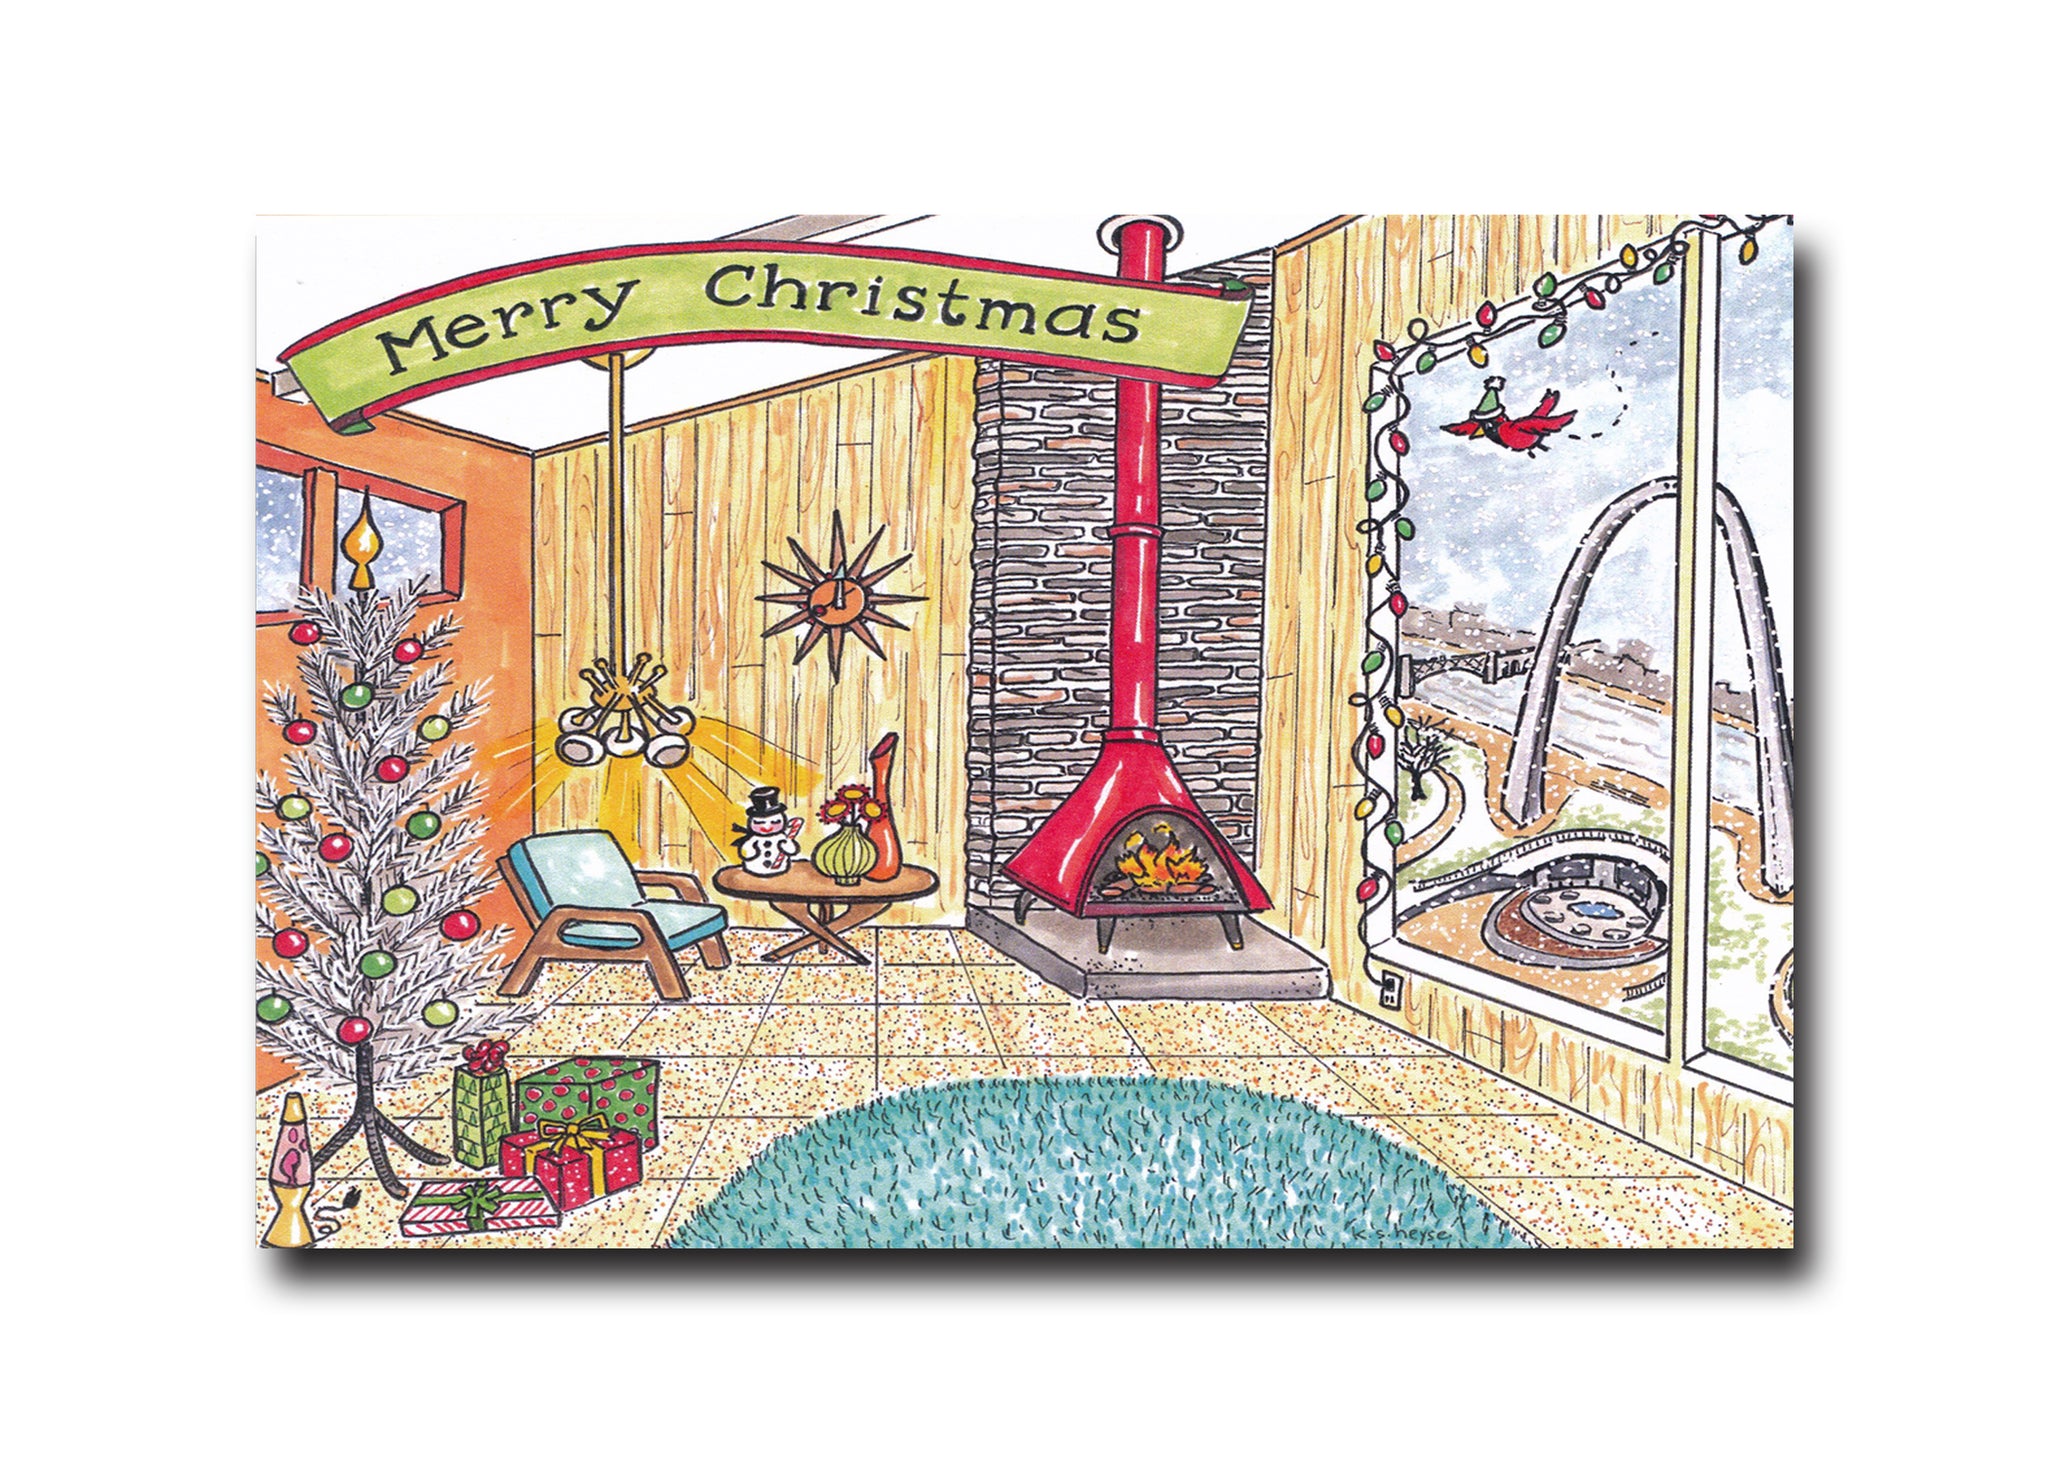 Goodnight St. Louis<br>Holiday Note Cards<br><br>Available Online and<br>at Retailers